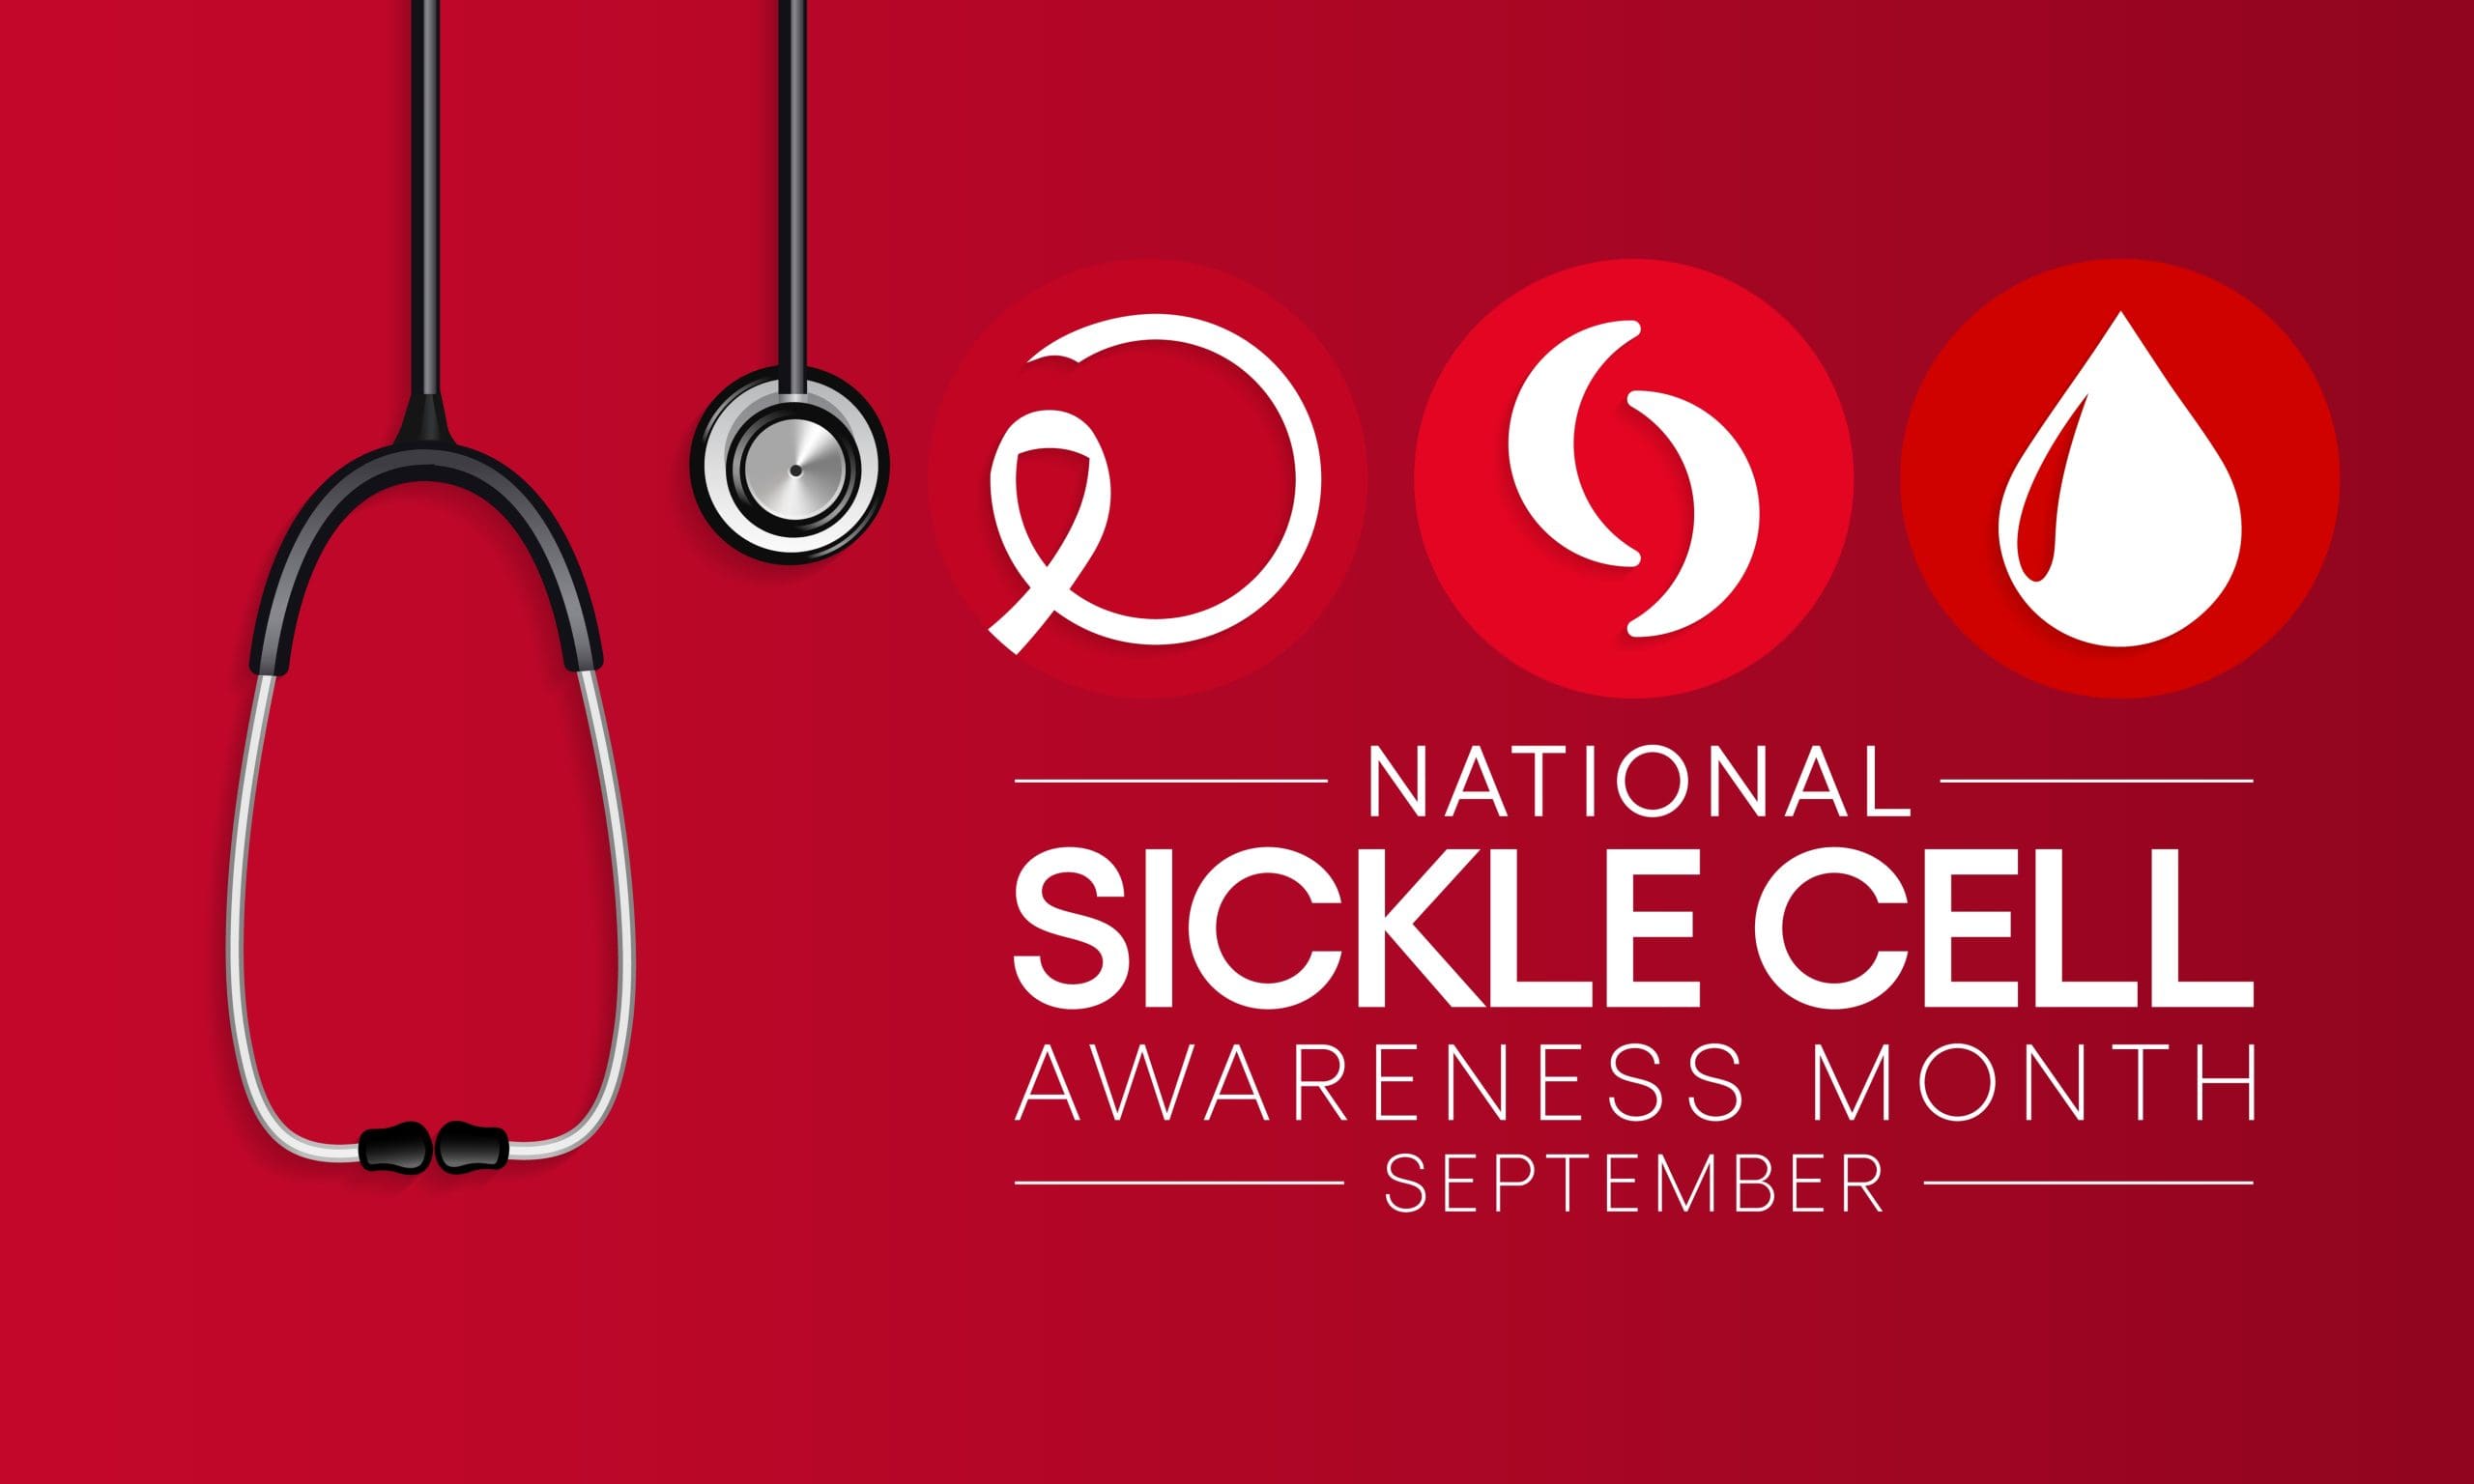 A Parent's Guide to Managing Sickle Cell Disease » Sickle Cell Society